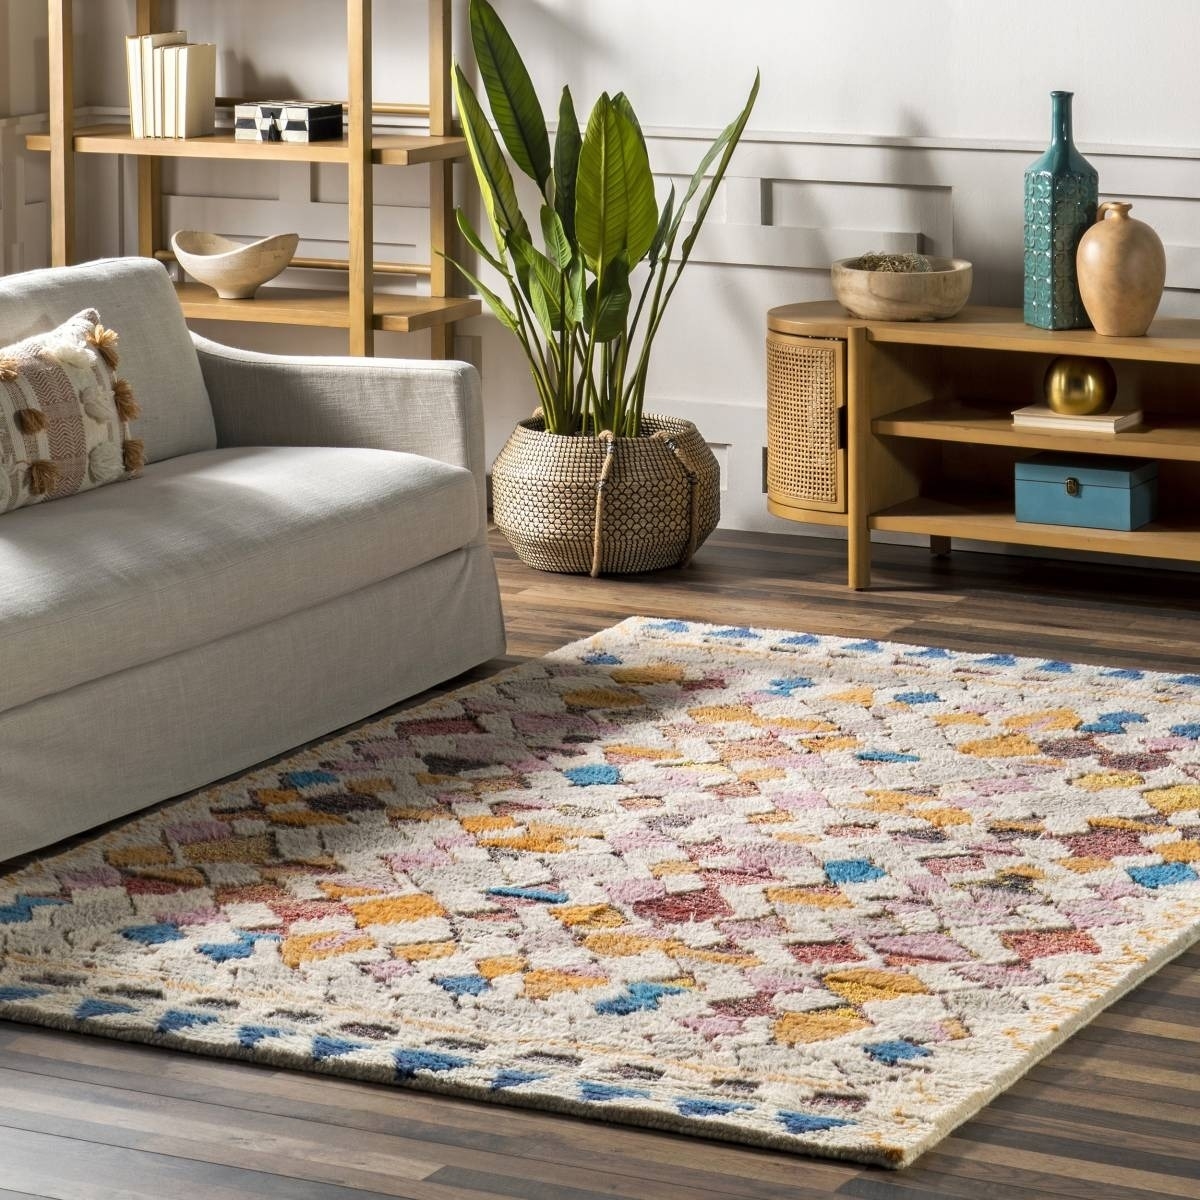 the shag rug with a colorful diamond pattern